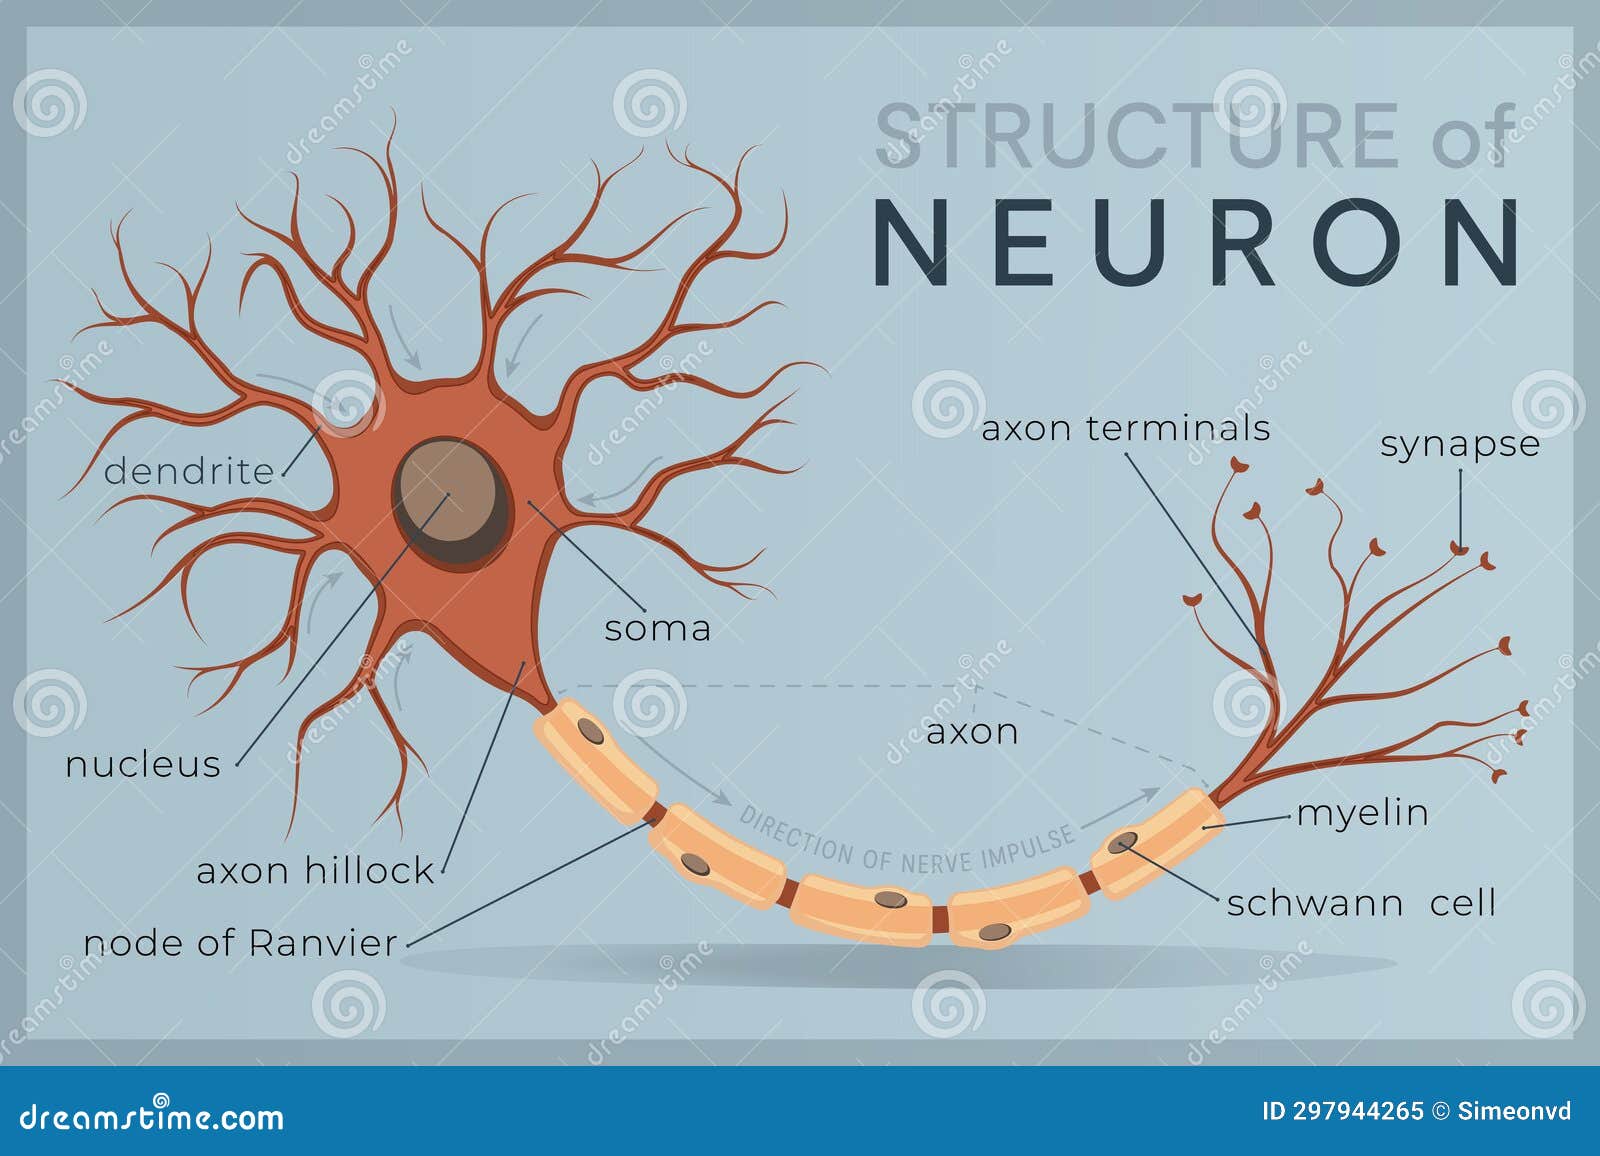 neuron. structure and anatomy of a nerve cell. the basic unit of communication in the nervous system.  